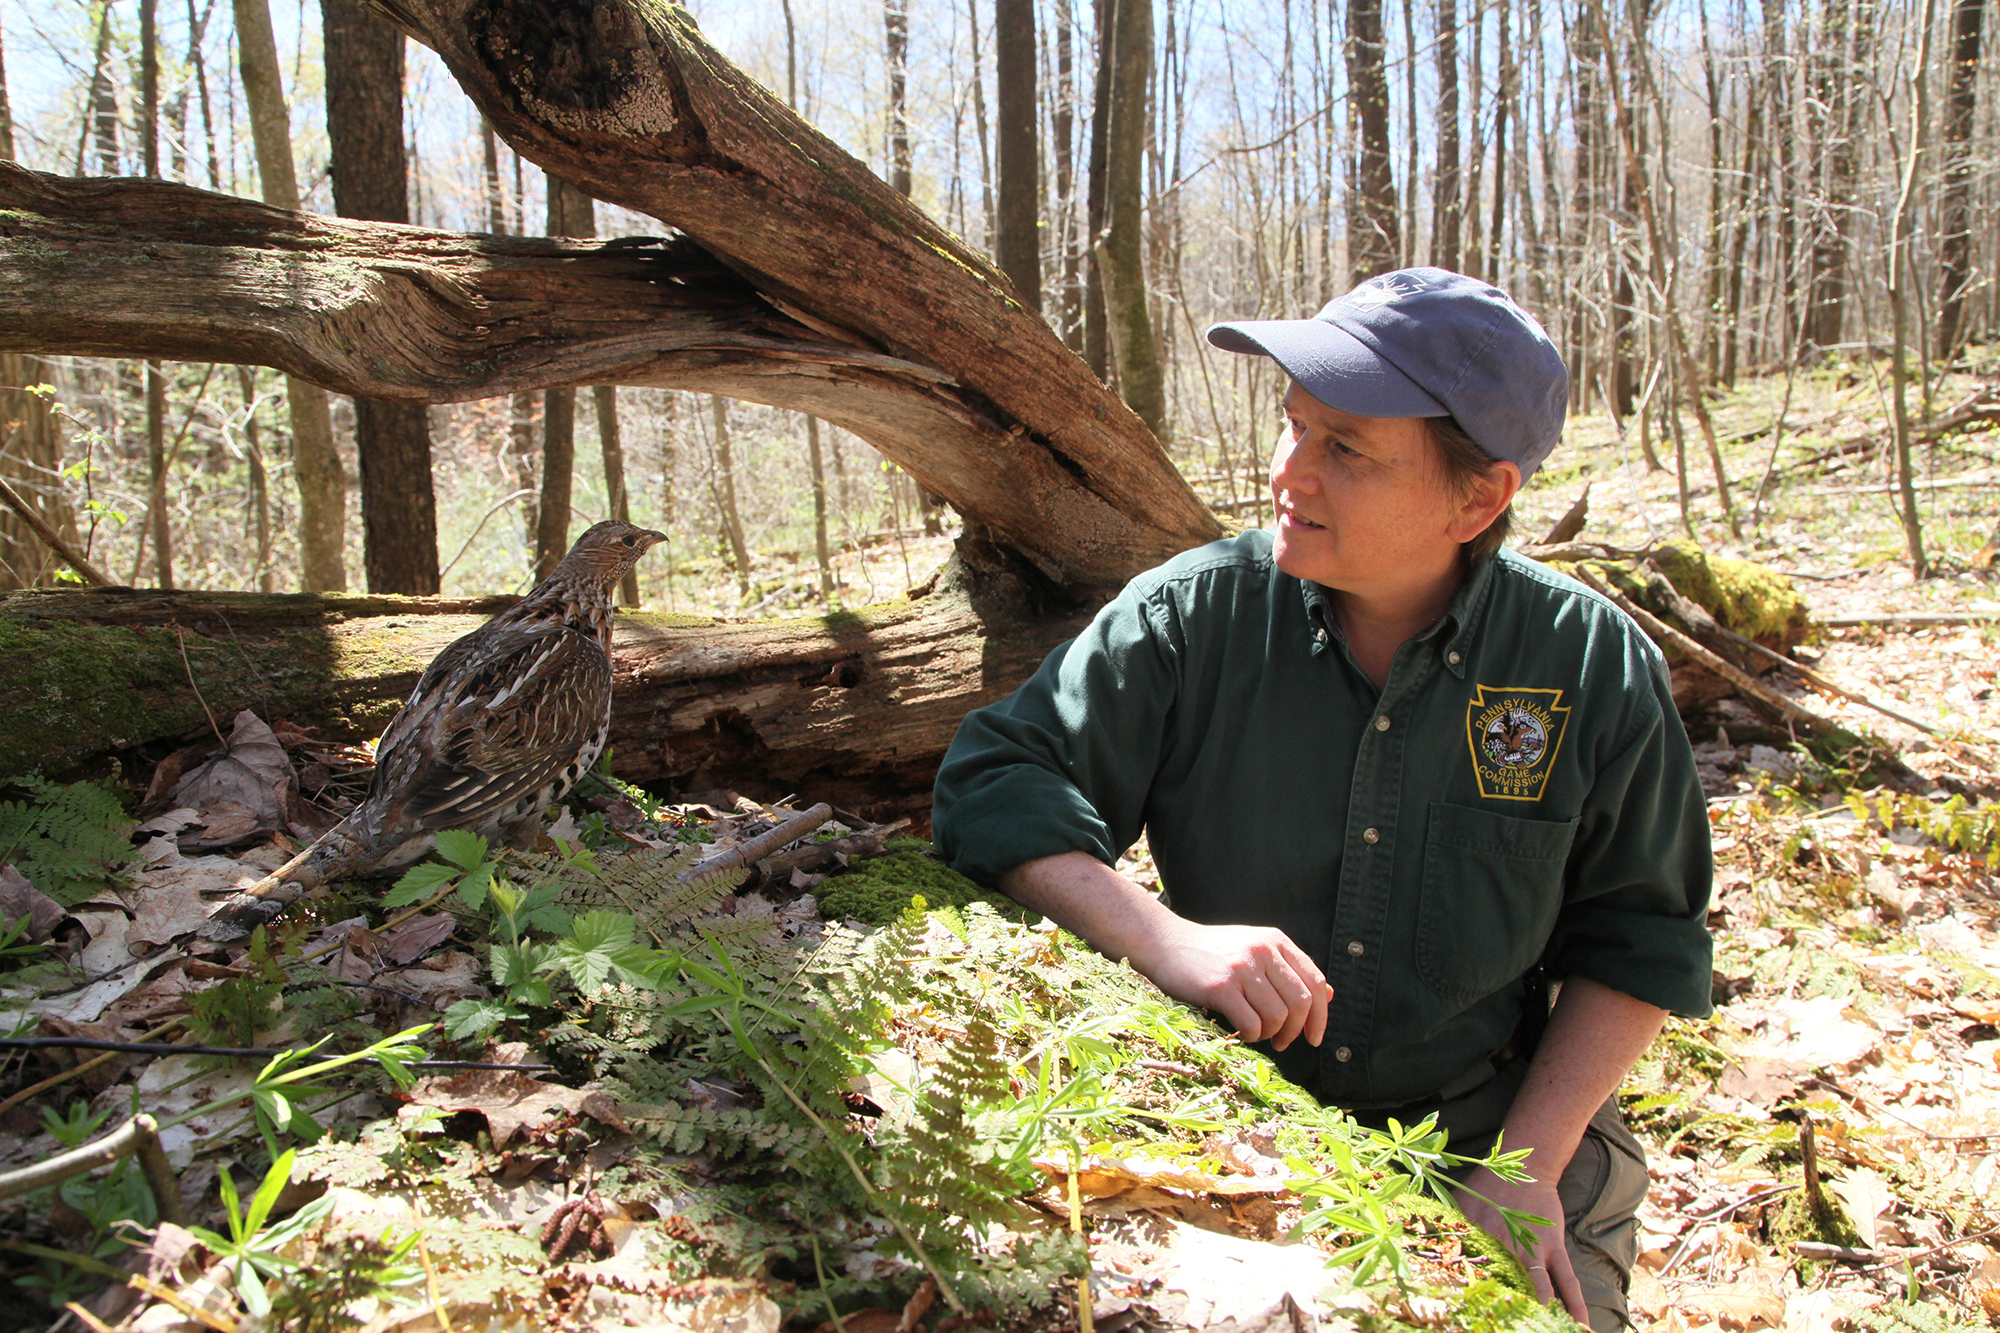 Ruffed grouse in nature